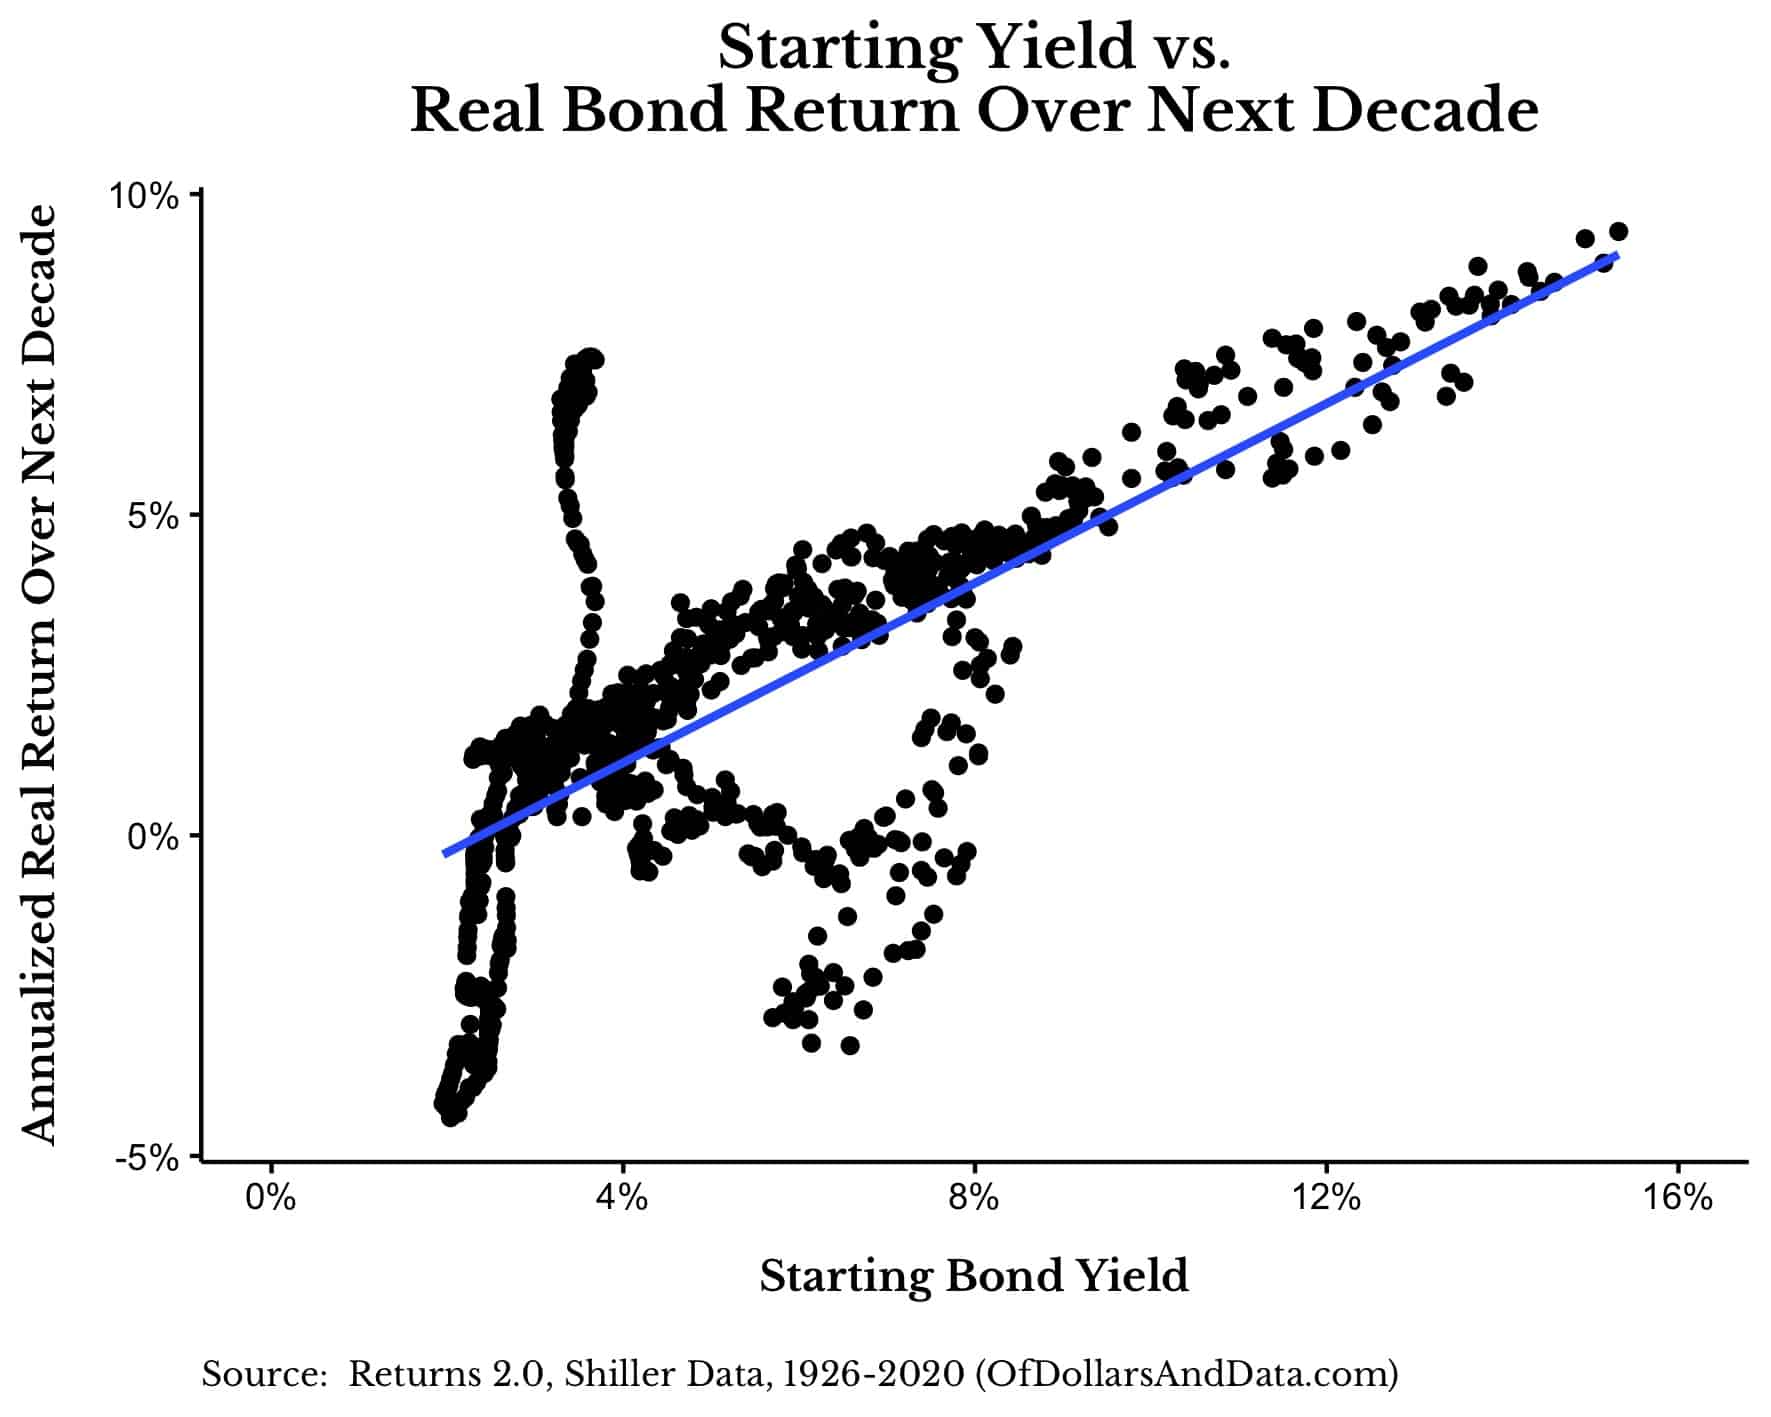 Starting yield vs real bond return over the next decade